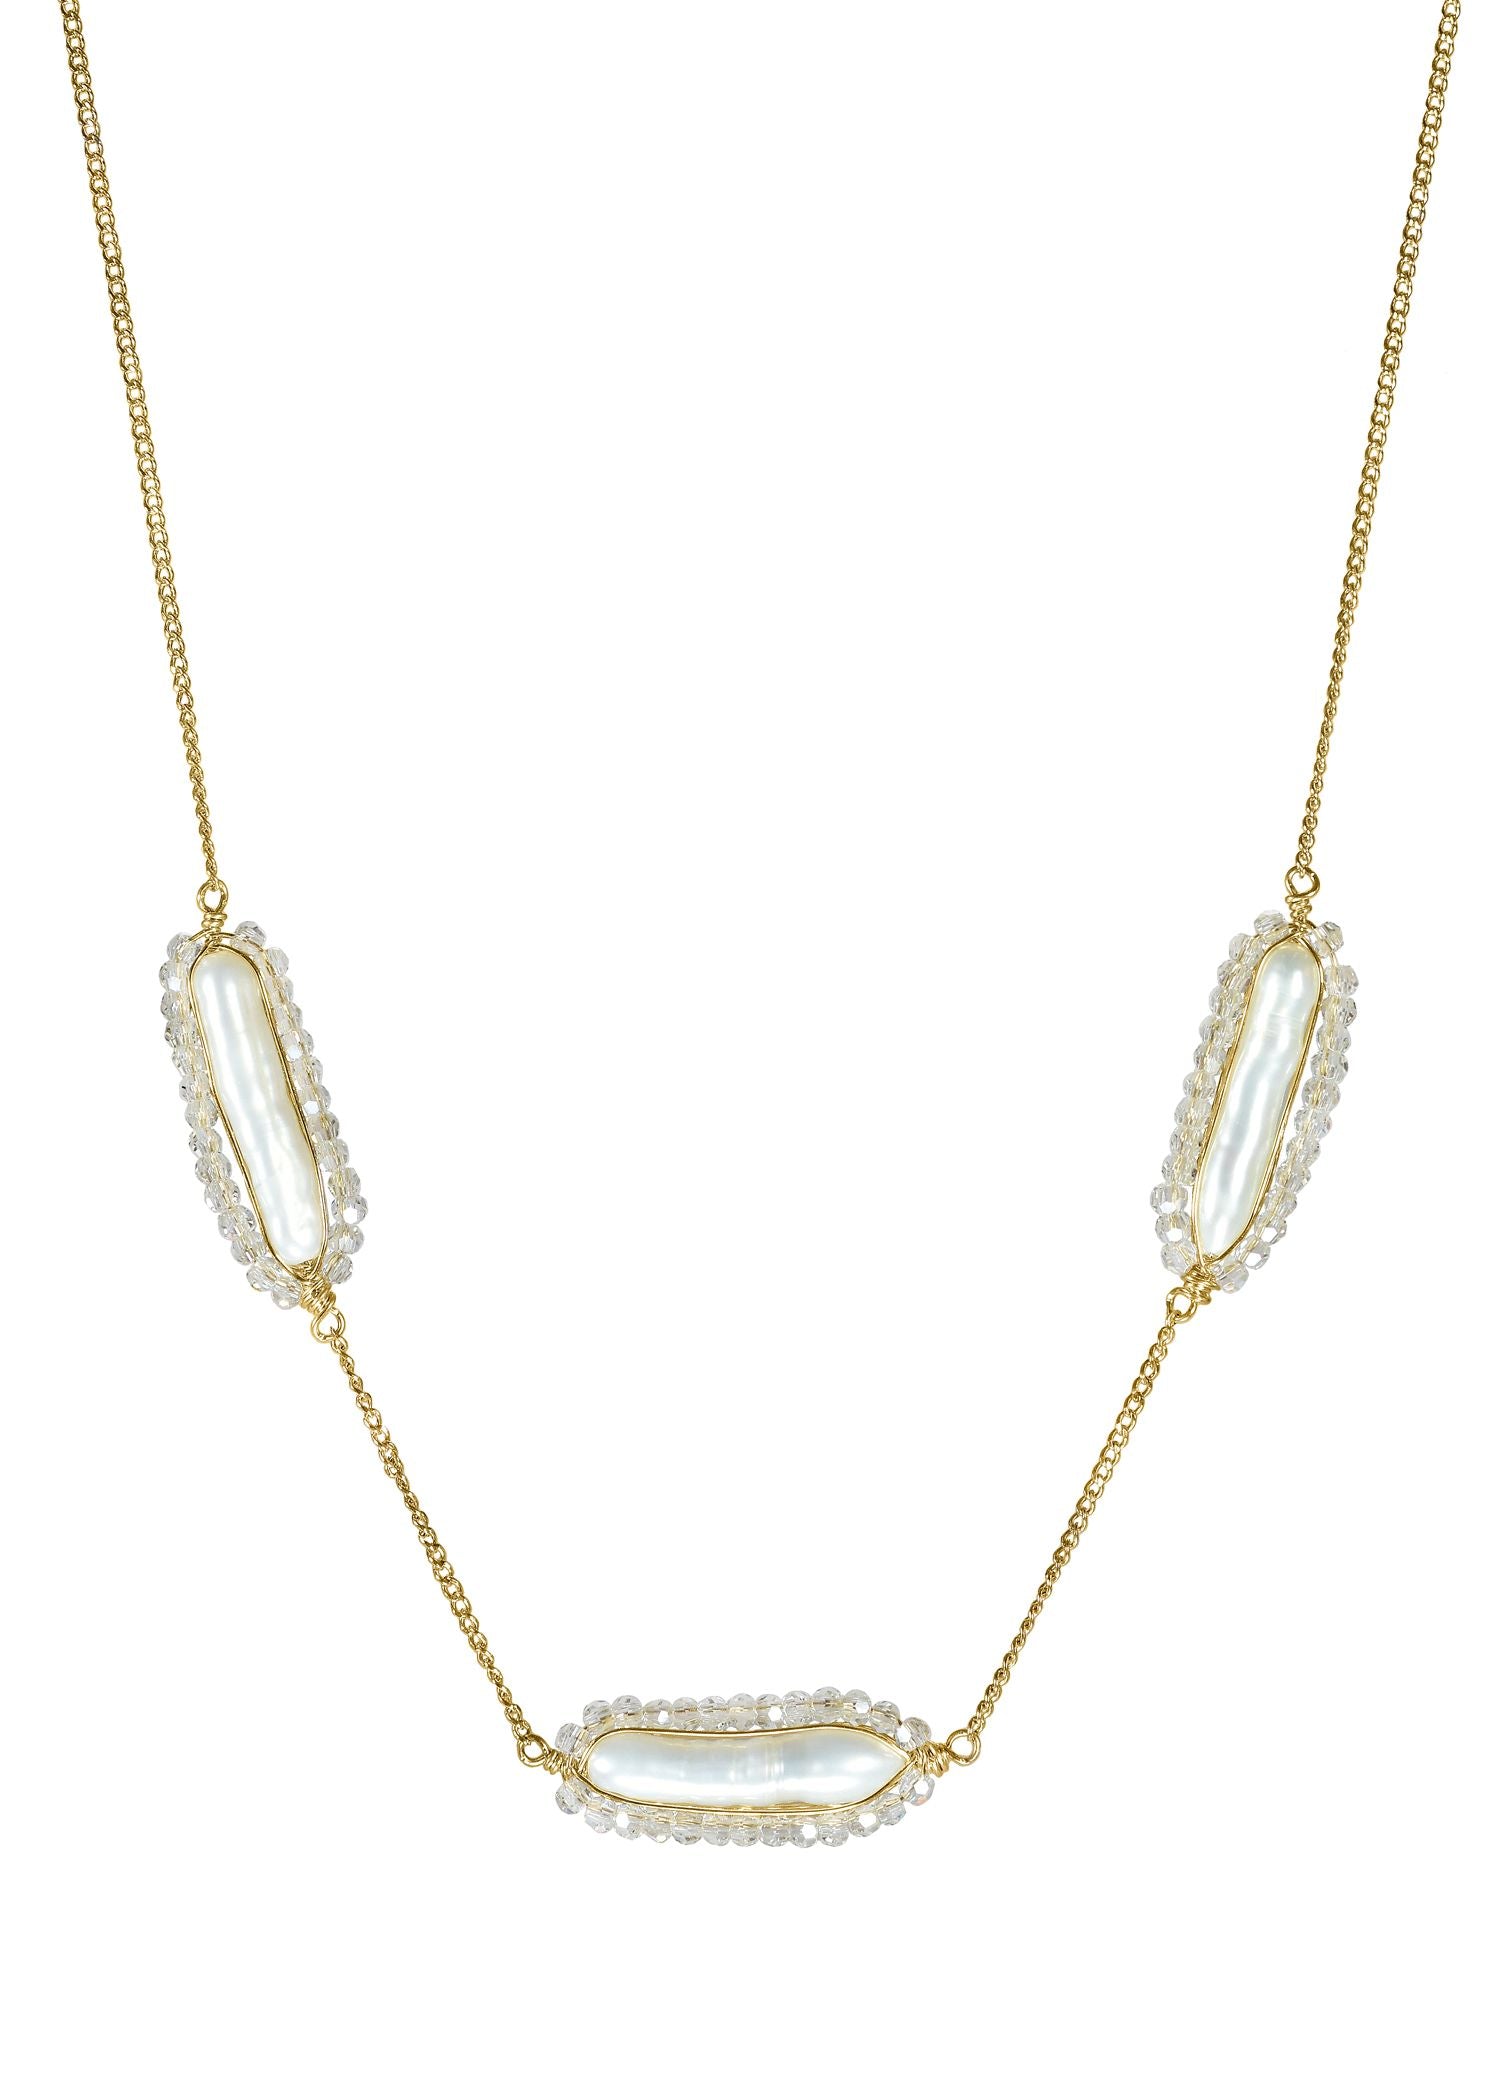 Fresh water pearl Crystal 14k gold fill Necklace measures 16” in length Pendant measures 3/4" in length and 5/16" in width (x3) Handmade in our Los Angeles studio